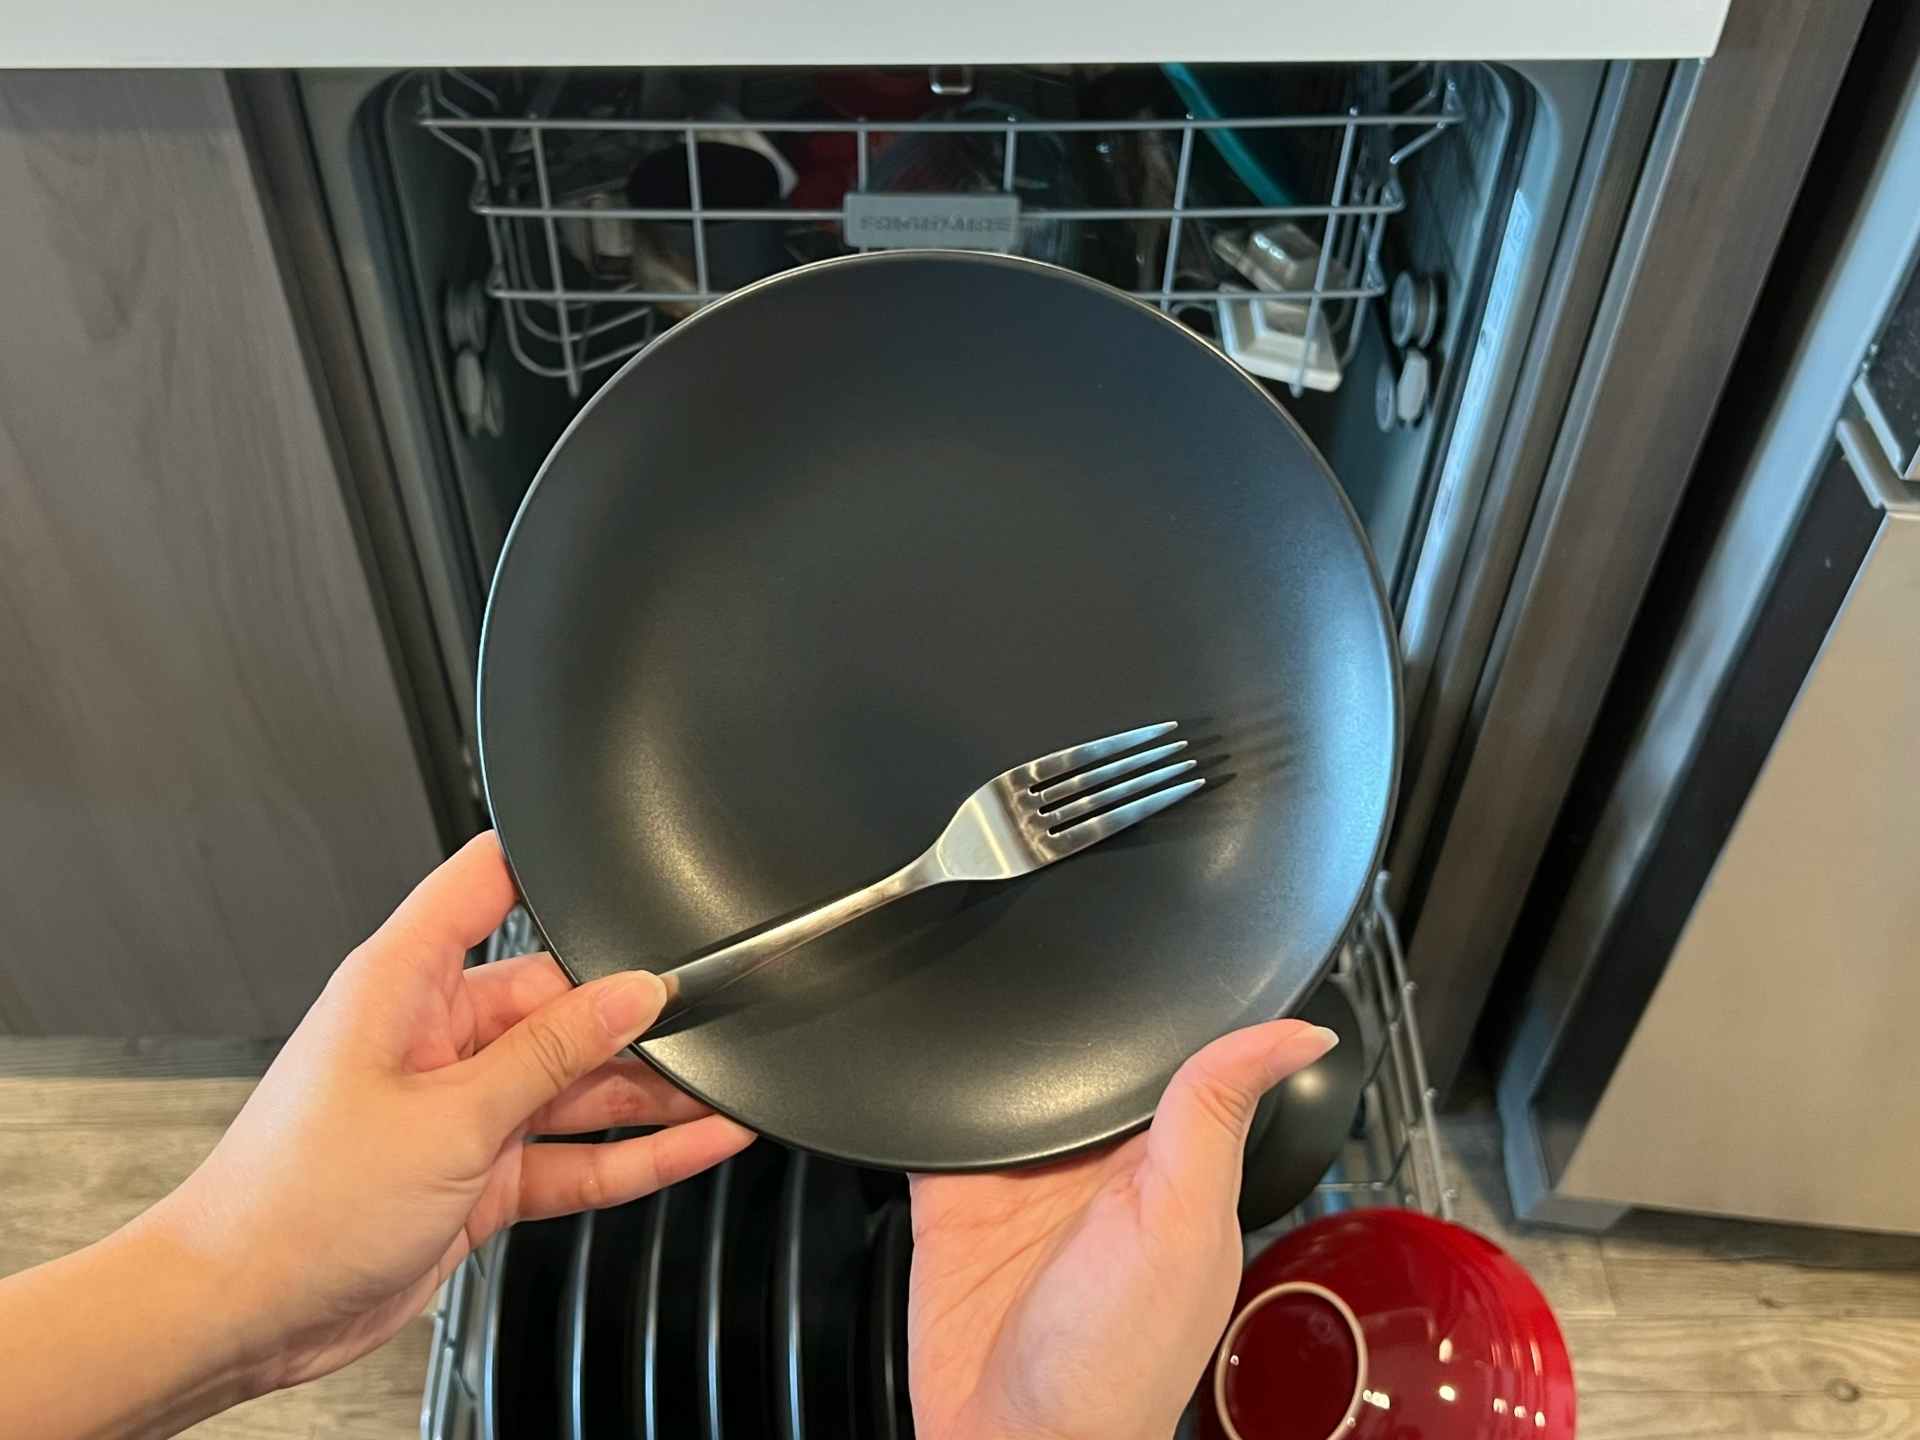 Hand holding a plate and fork in front of a dishwasher